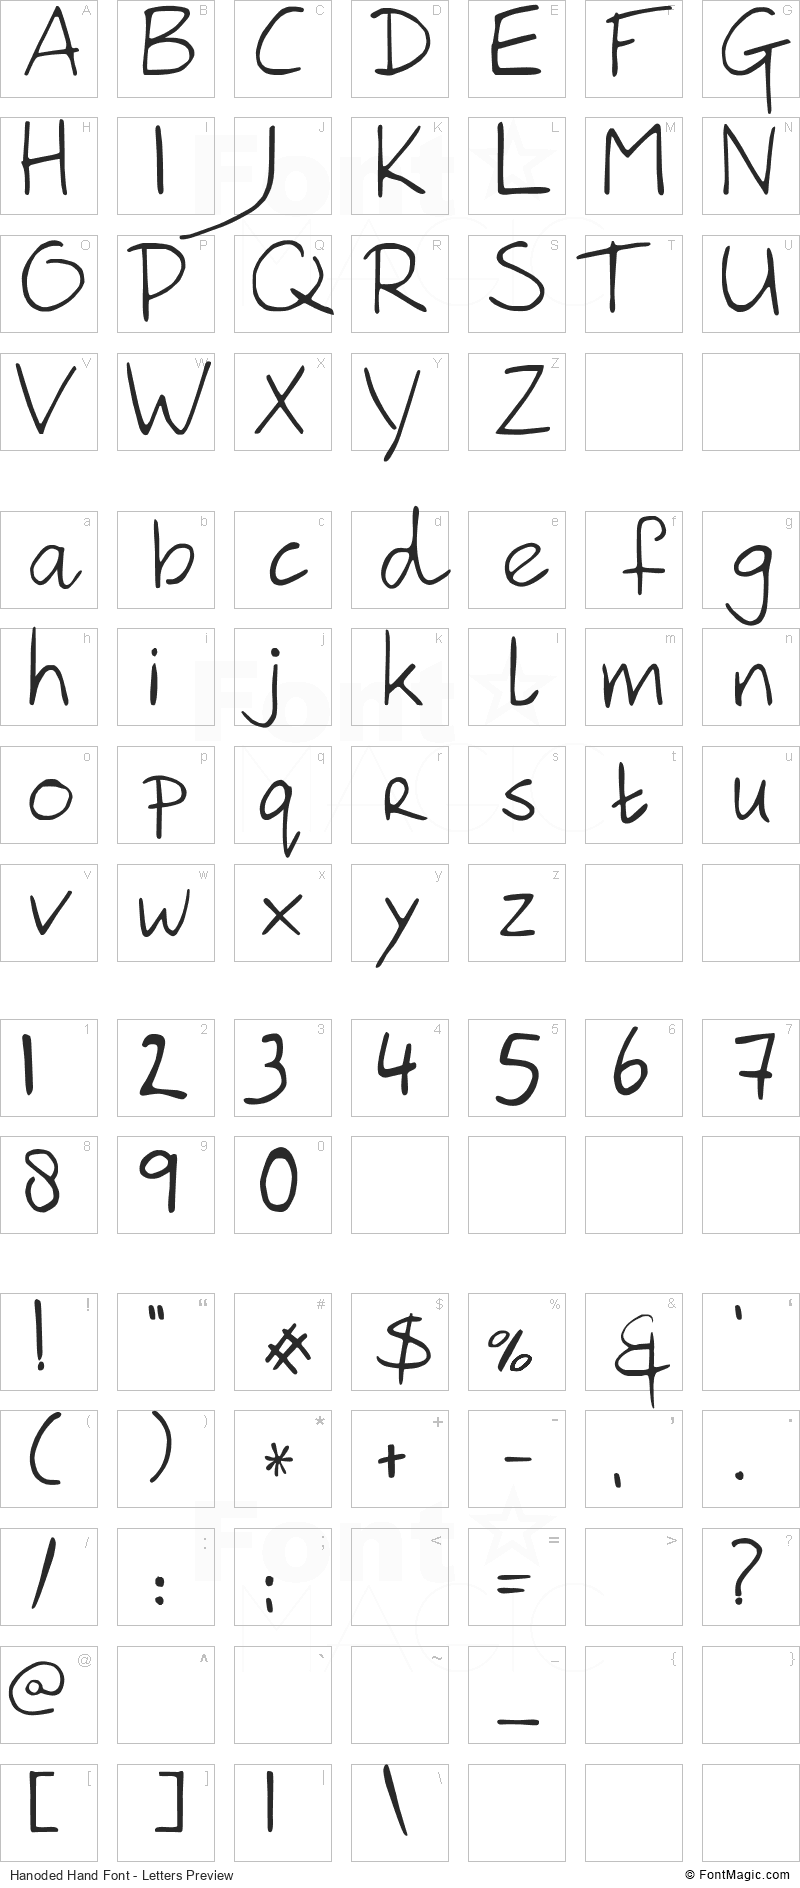 Hanoded Hand Font - All Latters Preview Chart